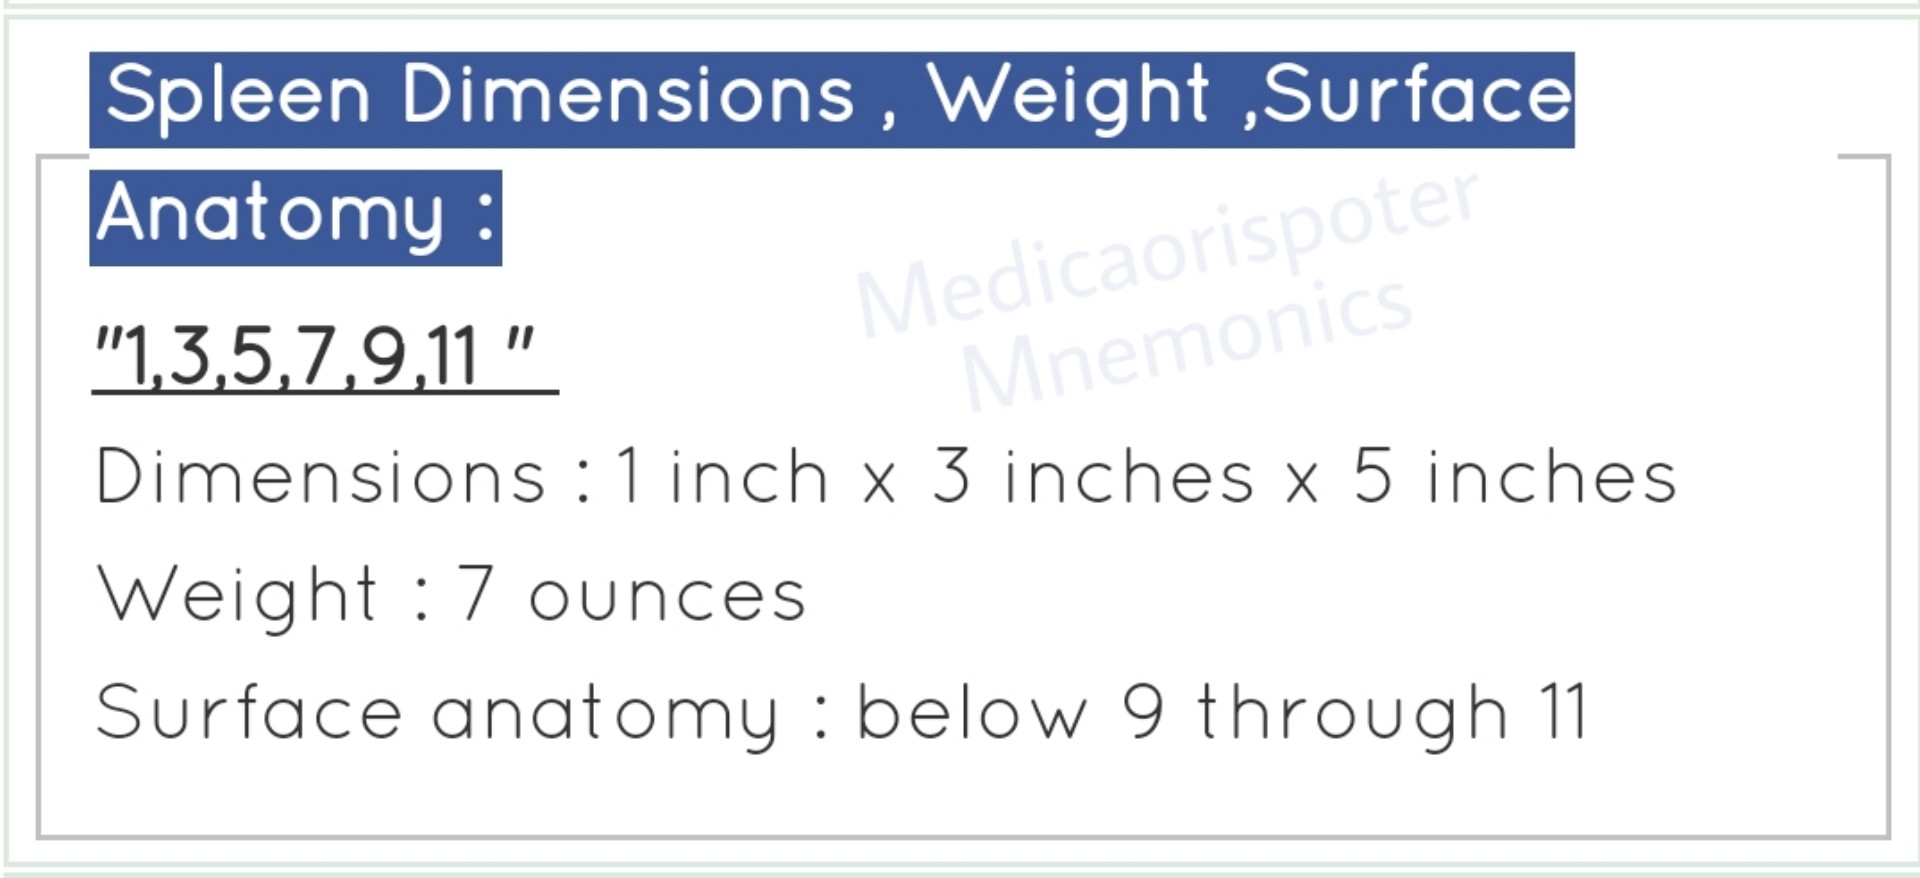 Spleen Dimensions Weight and Surfaces Anatomy